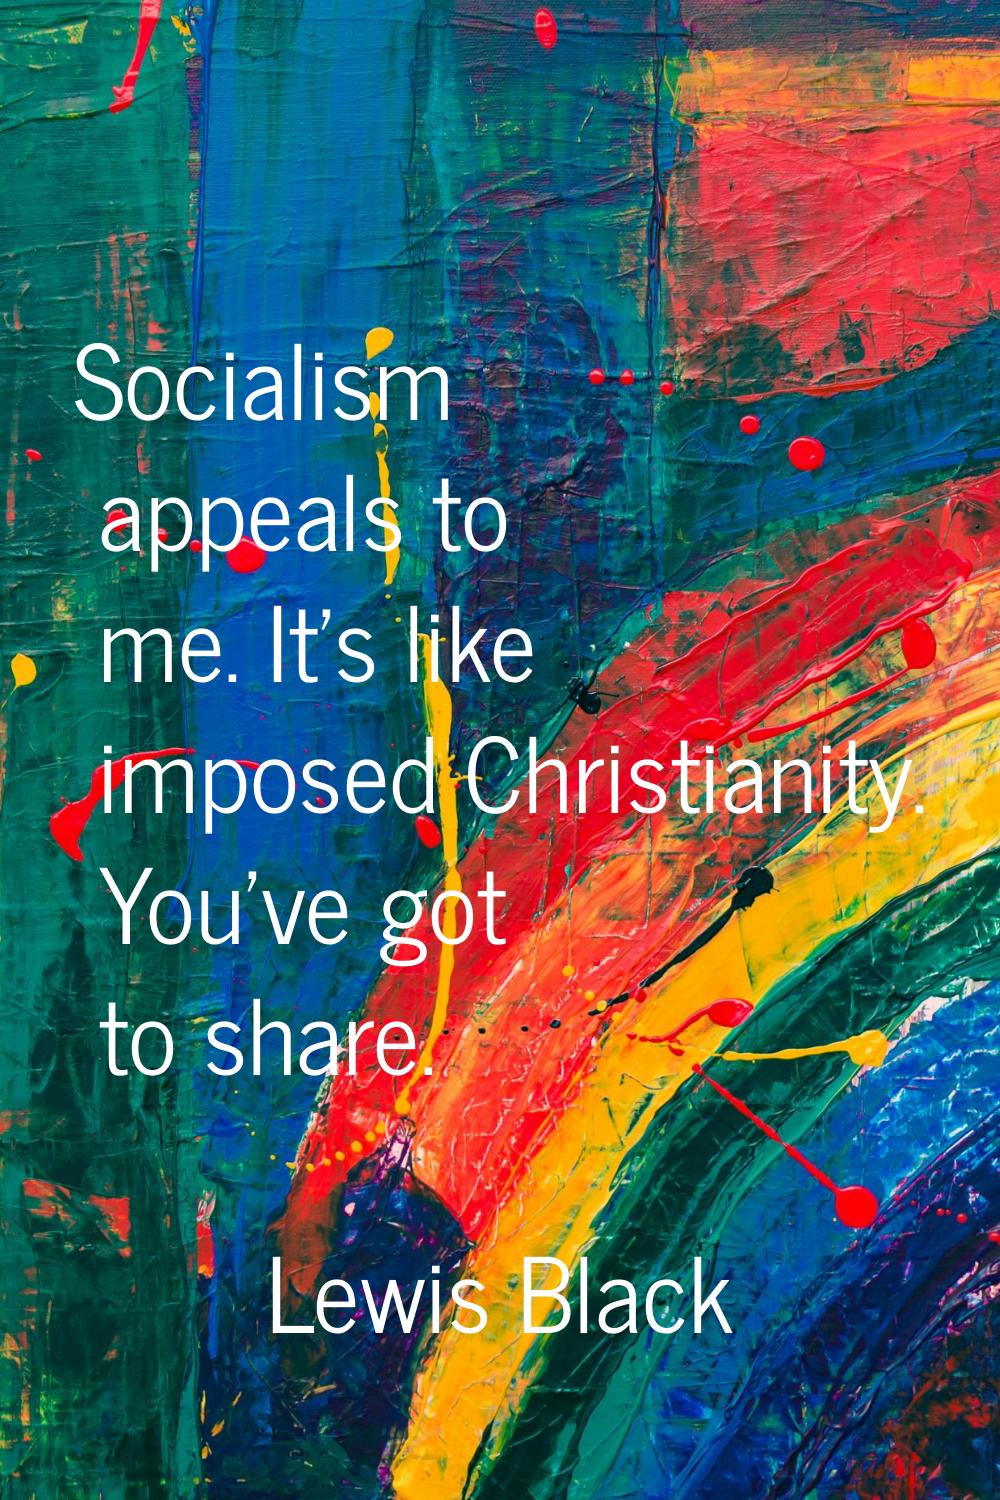 Socialism appeals to me. It's like imposed Christianity. You've got to share.